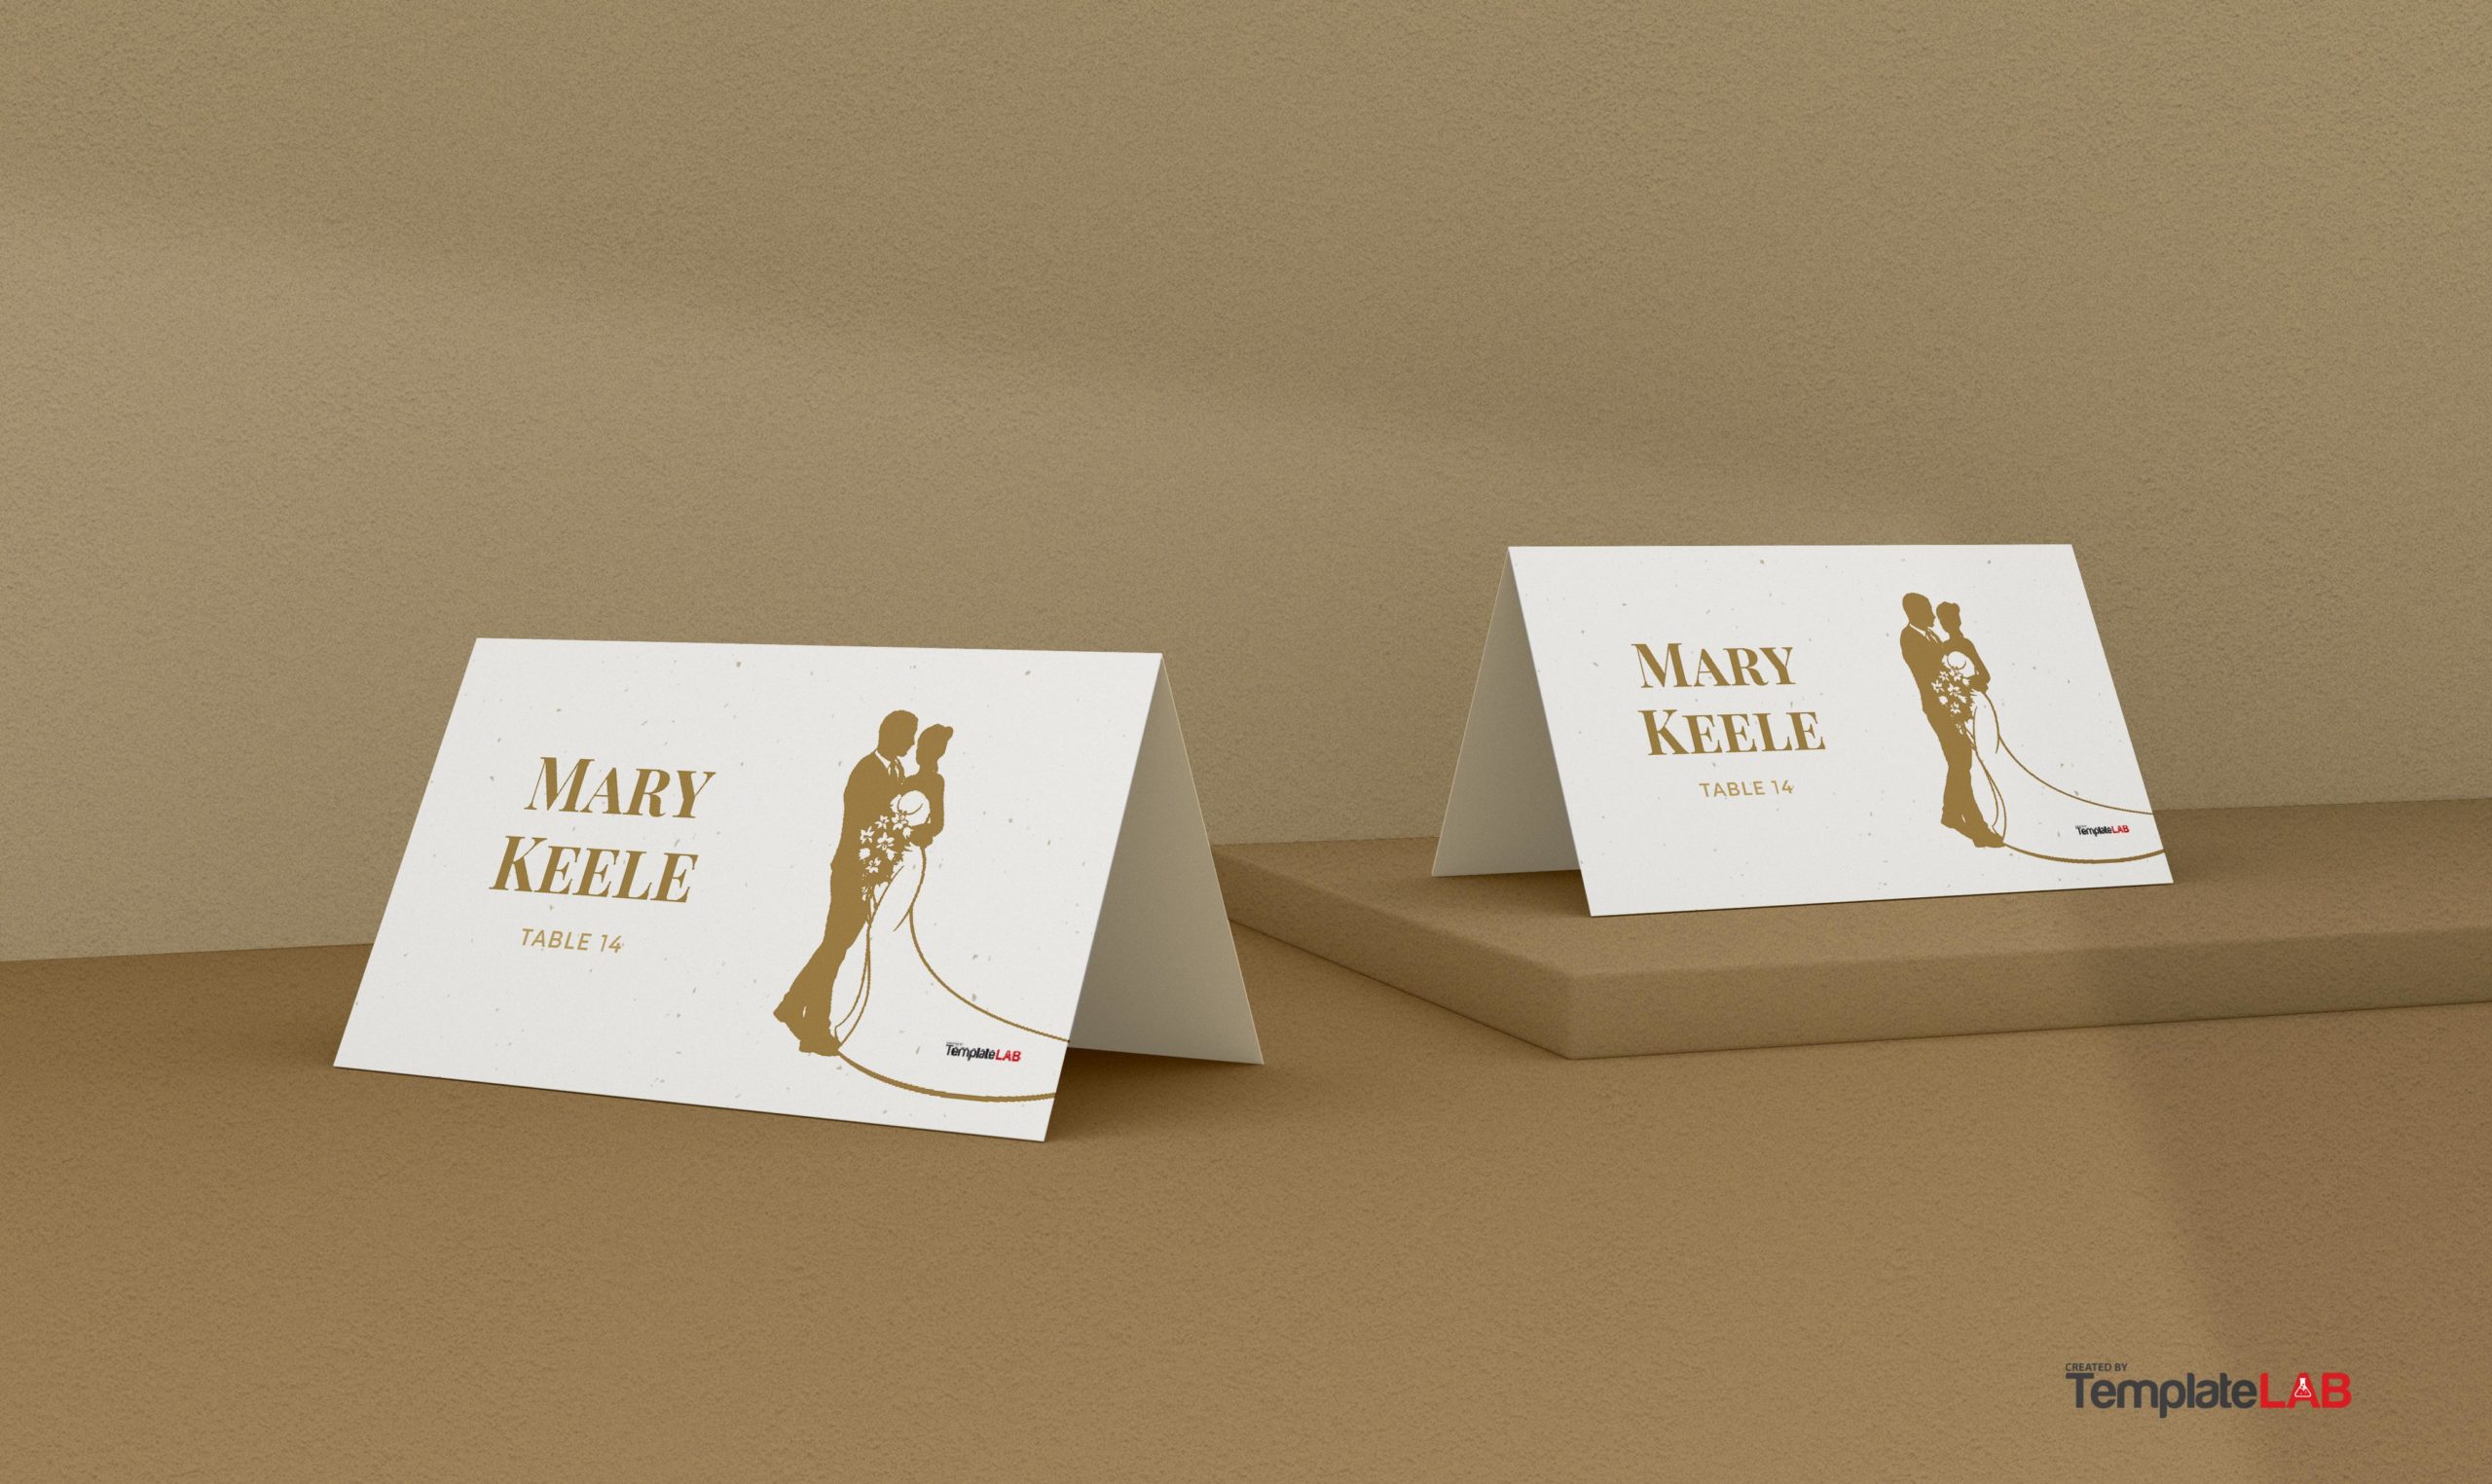 Weddings Fully Editable Template Calligraphy Name Card Simple Rustic vmt510 Reception Seating 